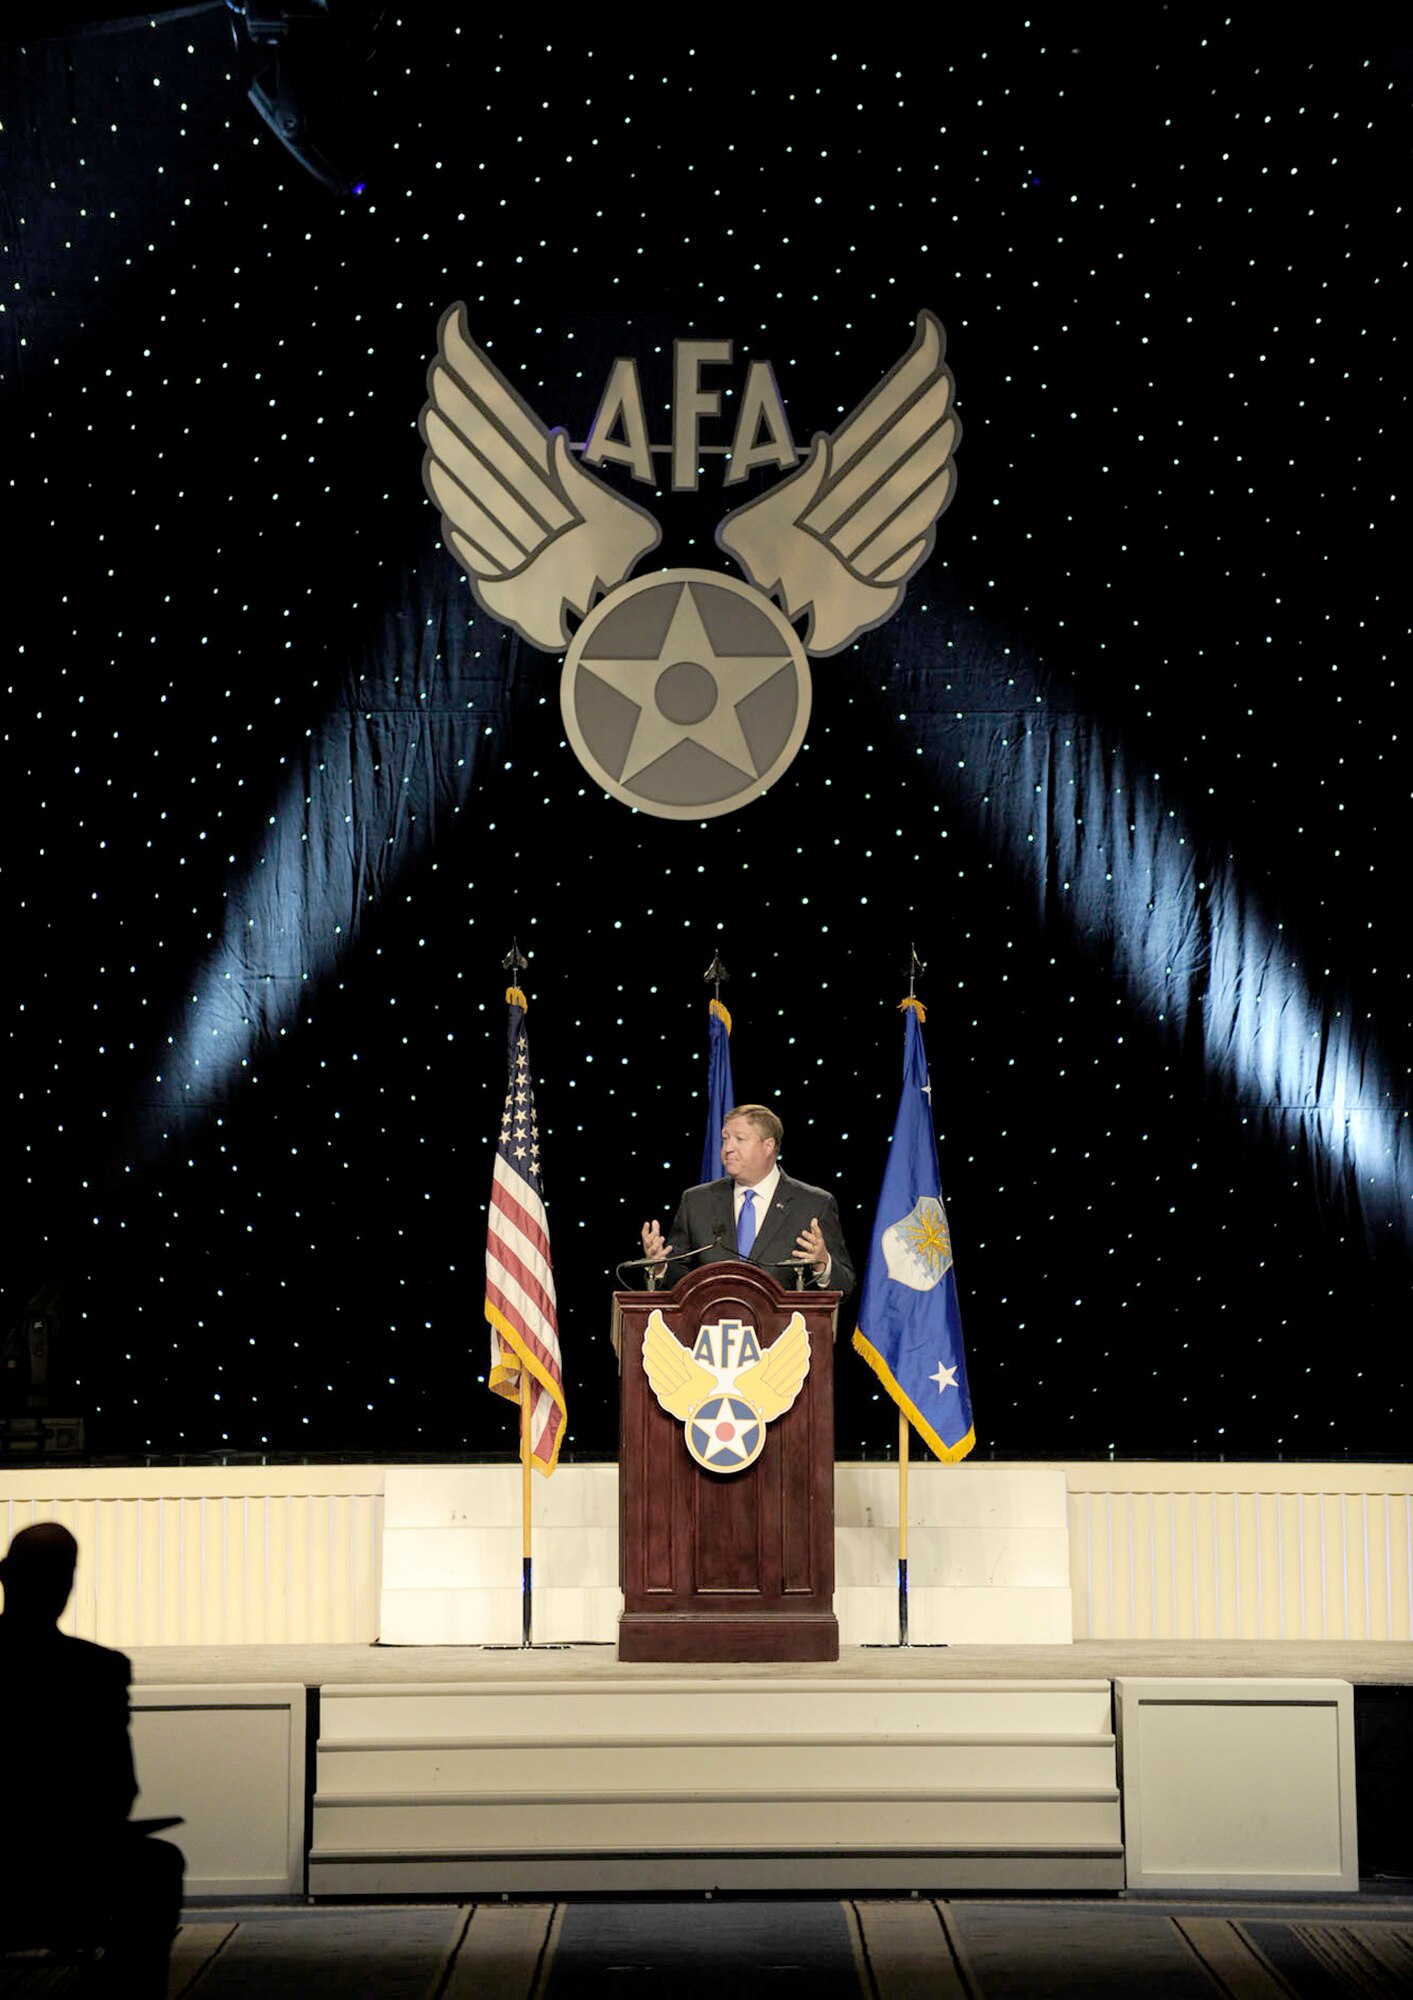 Secretary of the Air Force Michael Donley delivers his keynote speech during the opening morning of the Air Force Association's Air & Space Conference and Technology Exposition, Sept. 13, 2010, in National Harbor, Md. In concluding his speech, Secretary Donley discussed the world we live in today and how to ensure the Air Force remains well-postured for what tomorrow brings. (U.S. Air Force photo/Scott M. Ash)